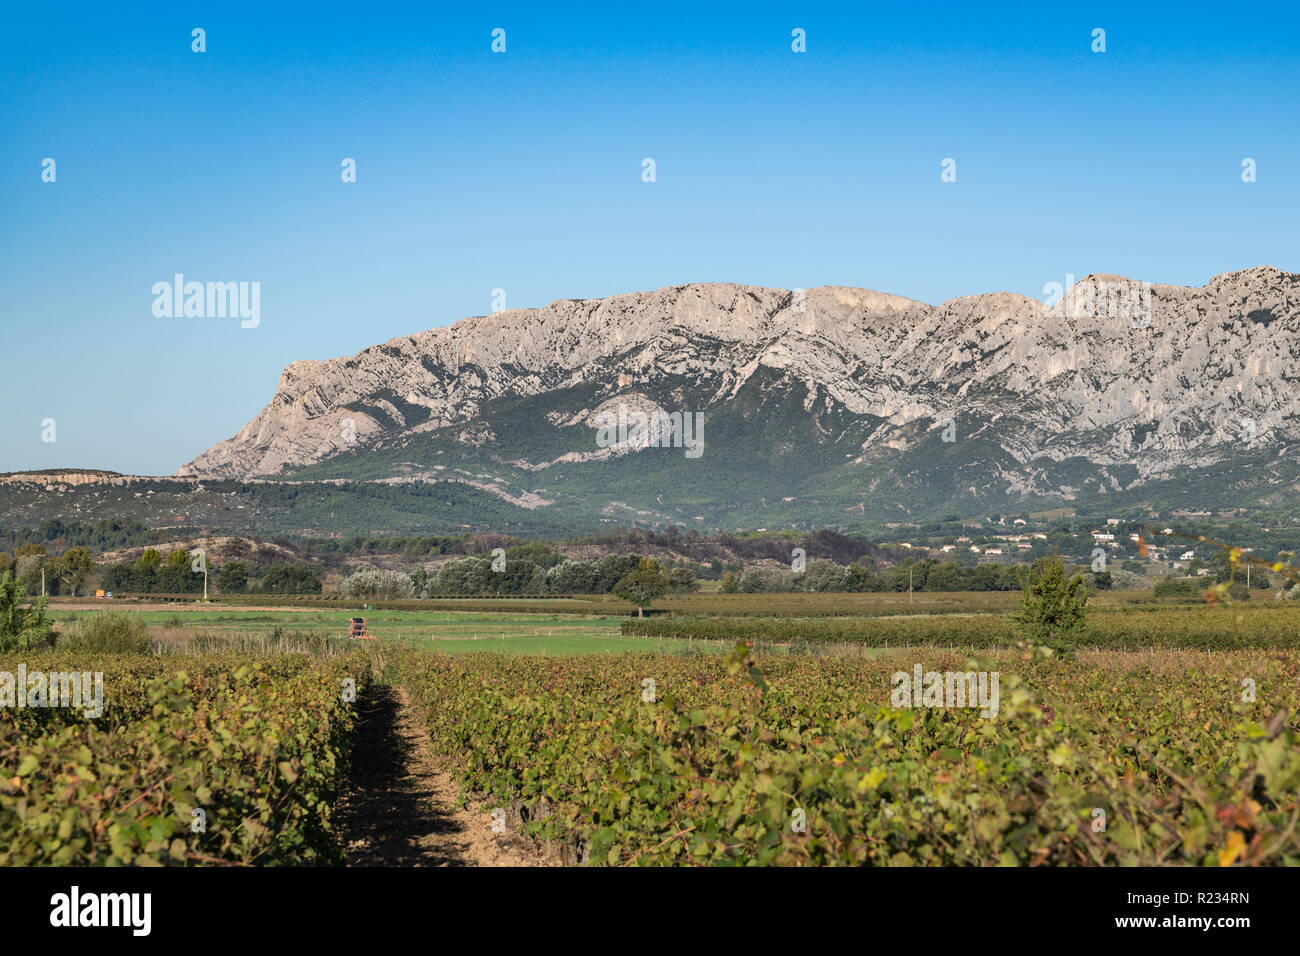 The famous and iconic Mount Sainte-Victoire in background with vineyards in South of France  near a village called Puyloubier. France, Europe Stock Photo